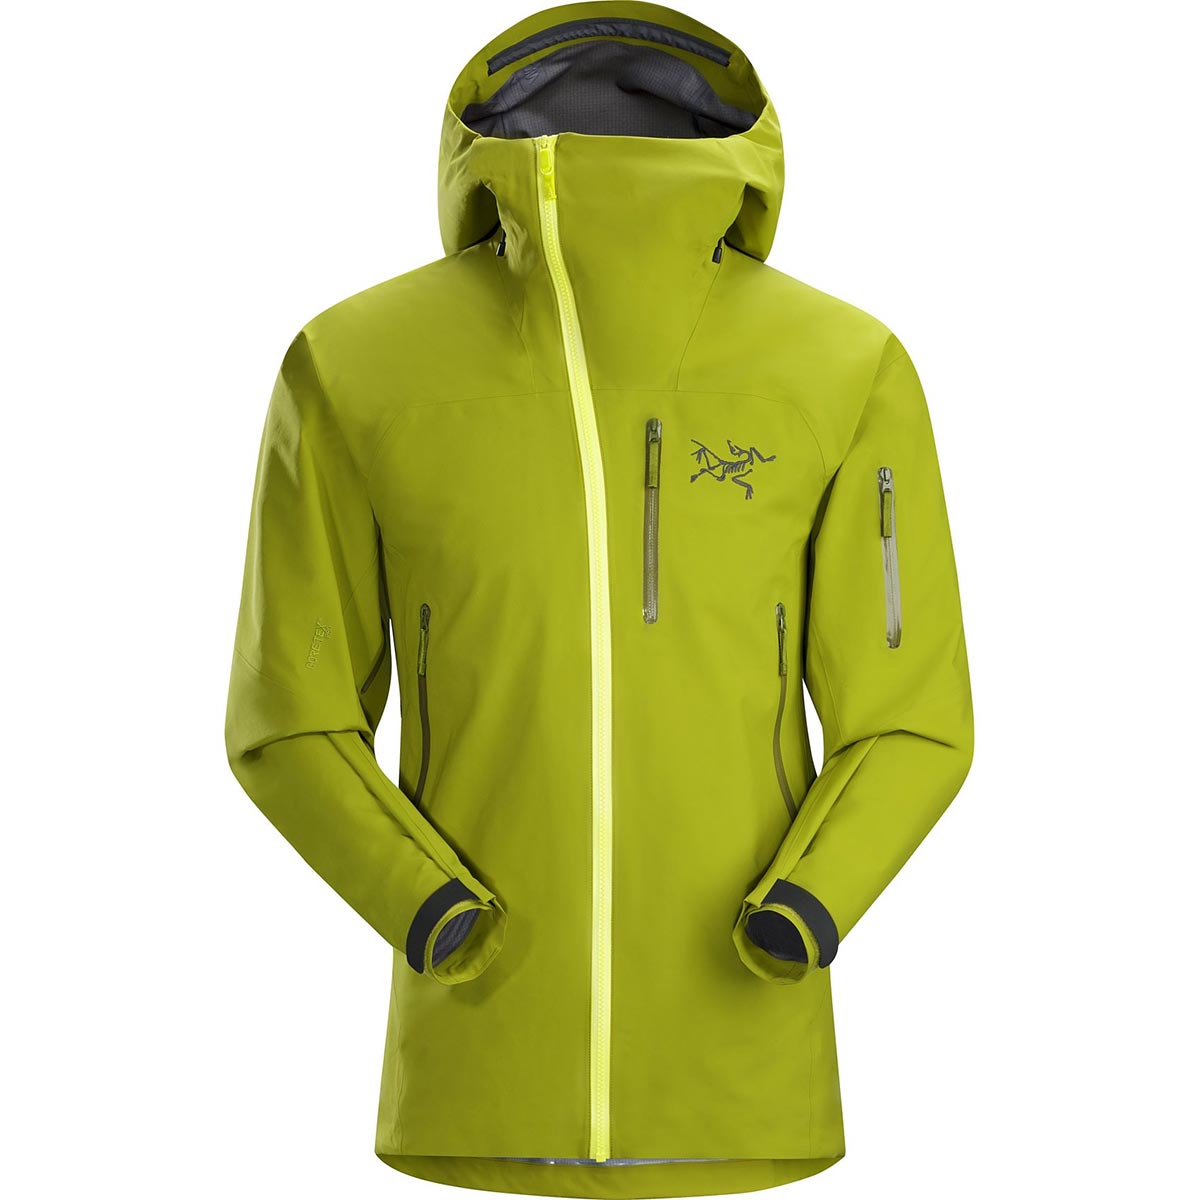 Arc'teryx Sidewinder Jacket, men's, discontinued Fall  colors